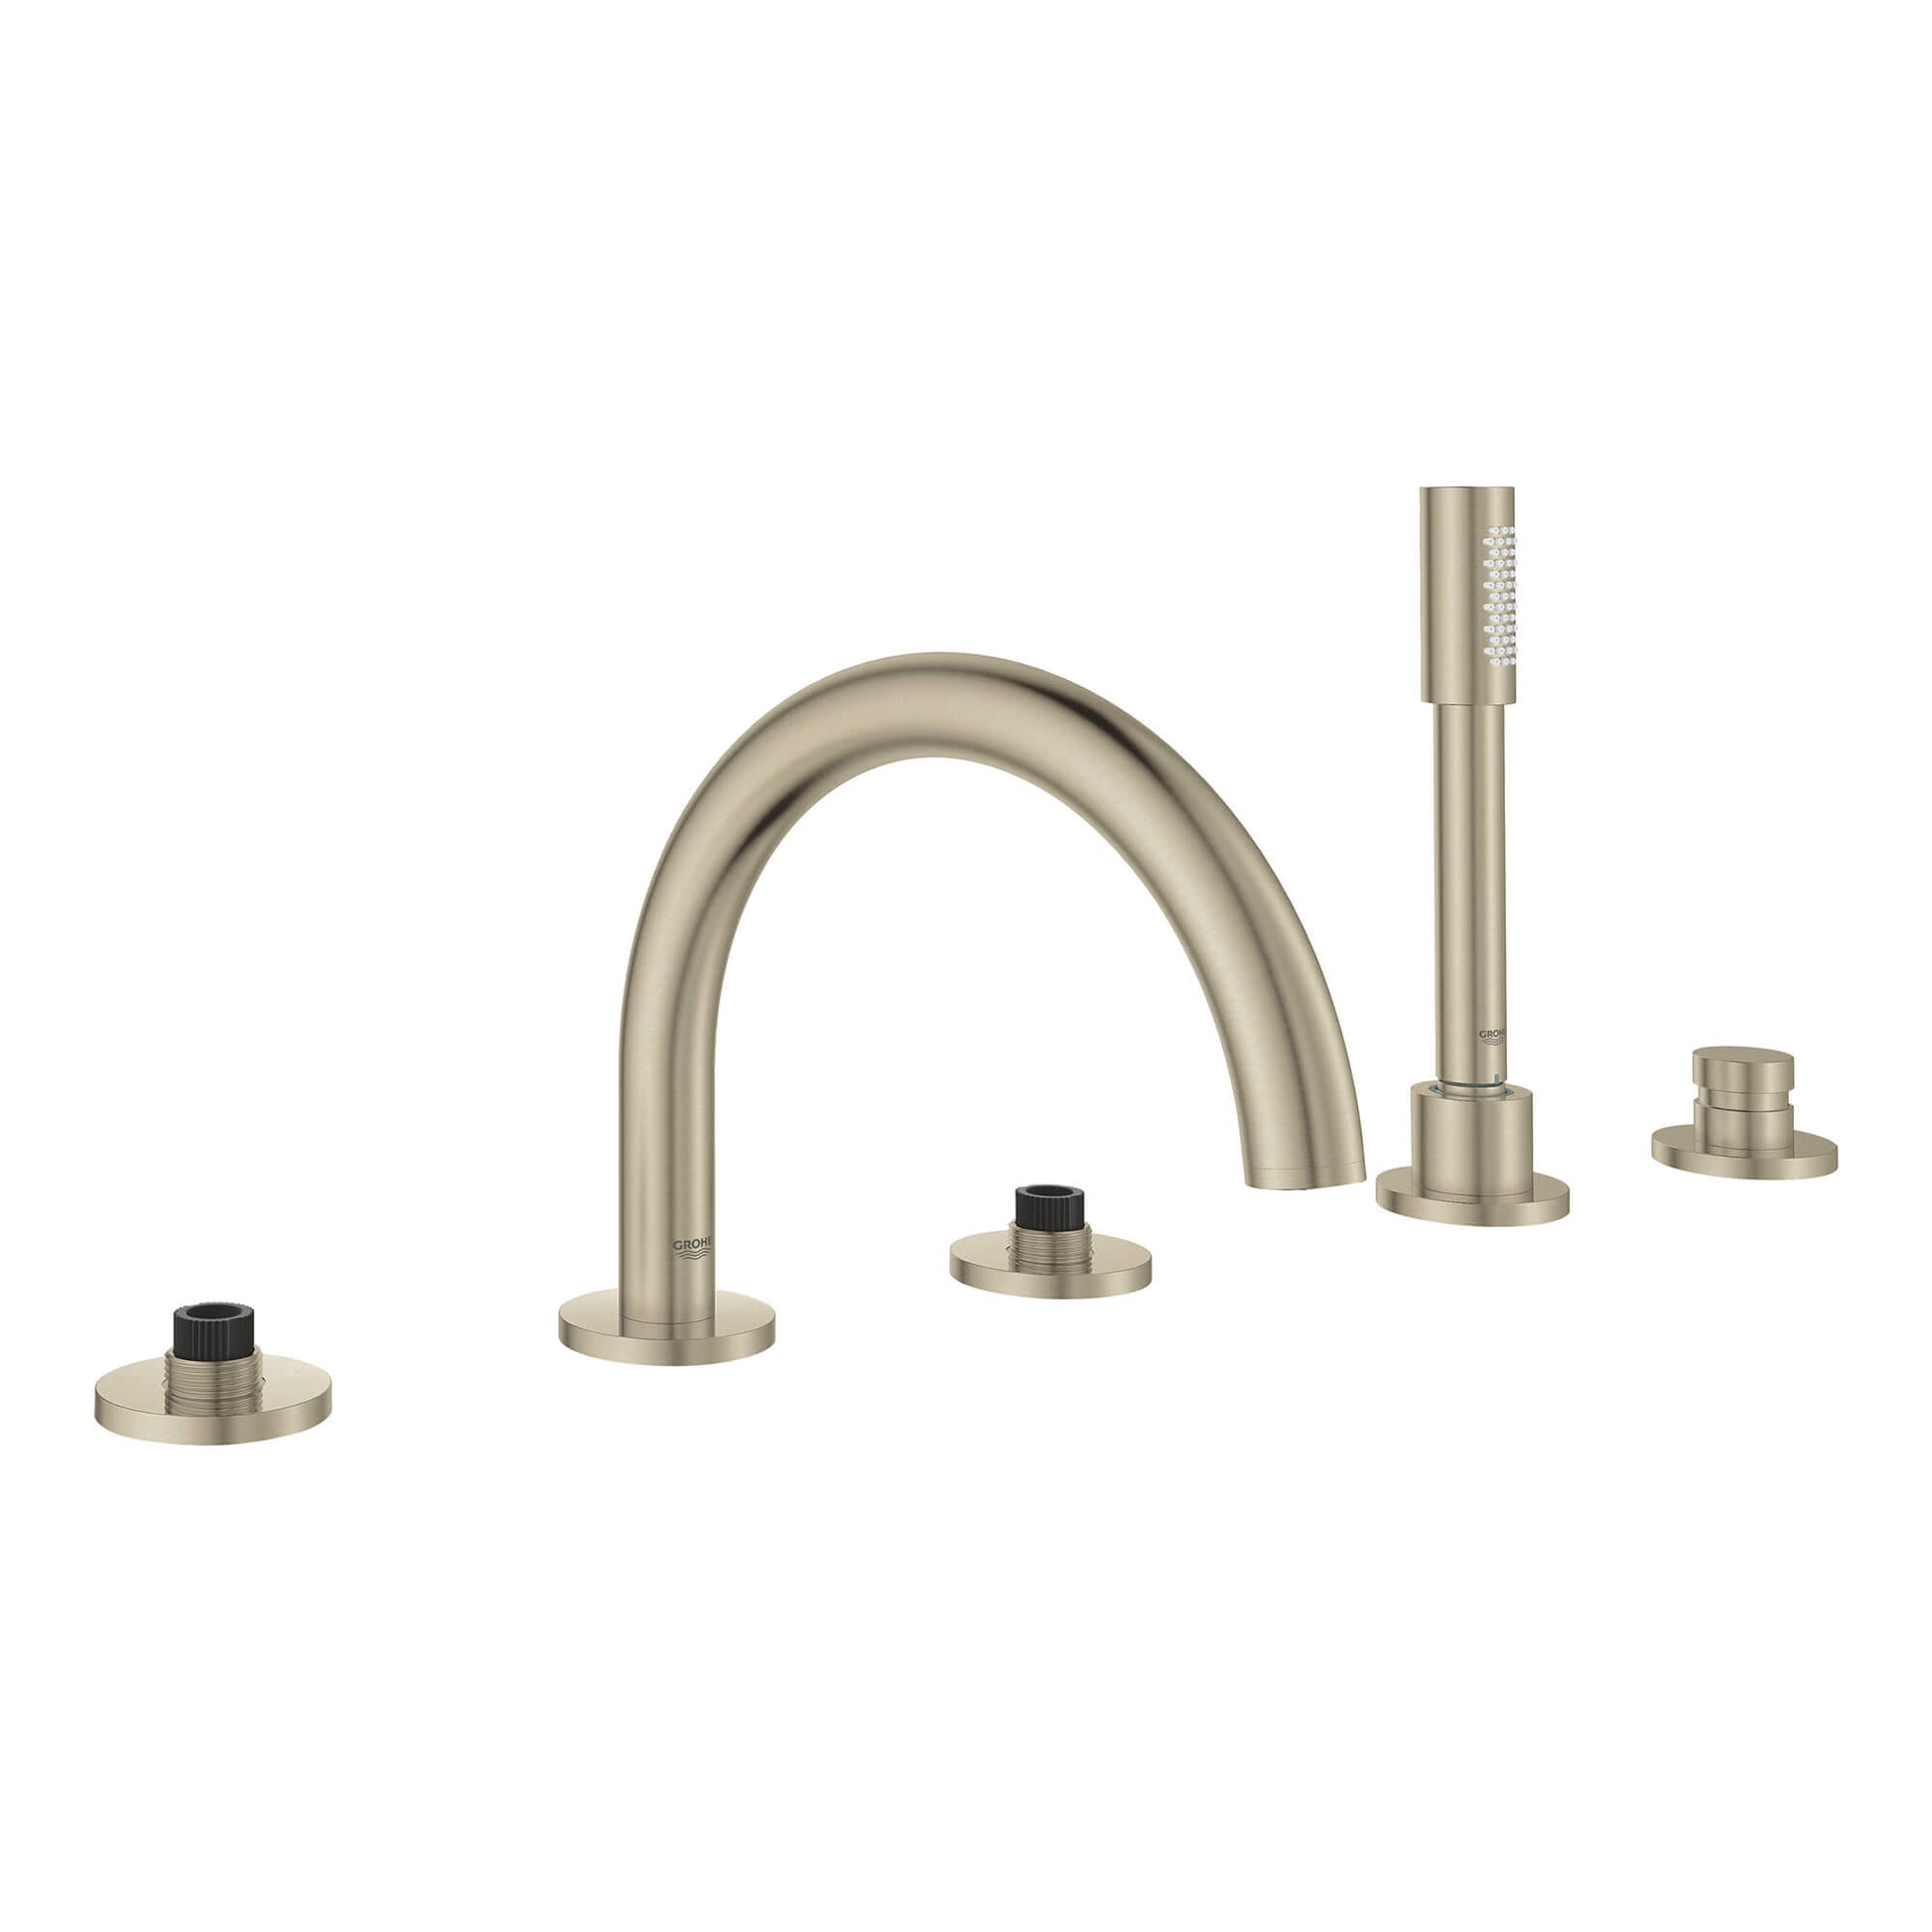 GROHE 25049EN3 Atrio New Brushed Nickel 5-Hole 2-Handle Deck Mount Roman Tub Faucet with 1.75 GPM Hand Shower